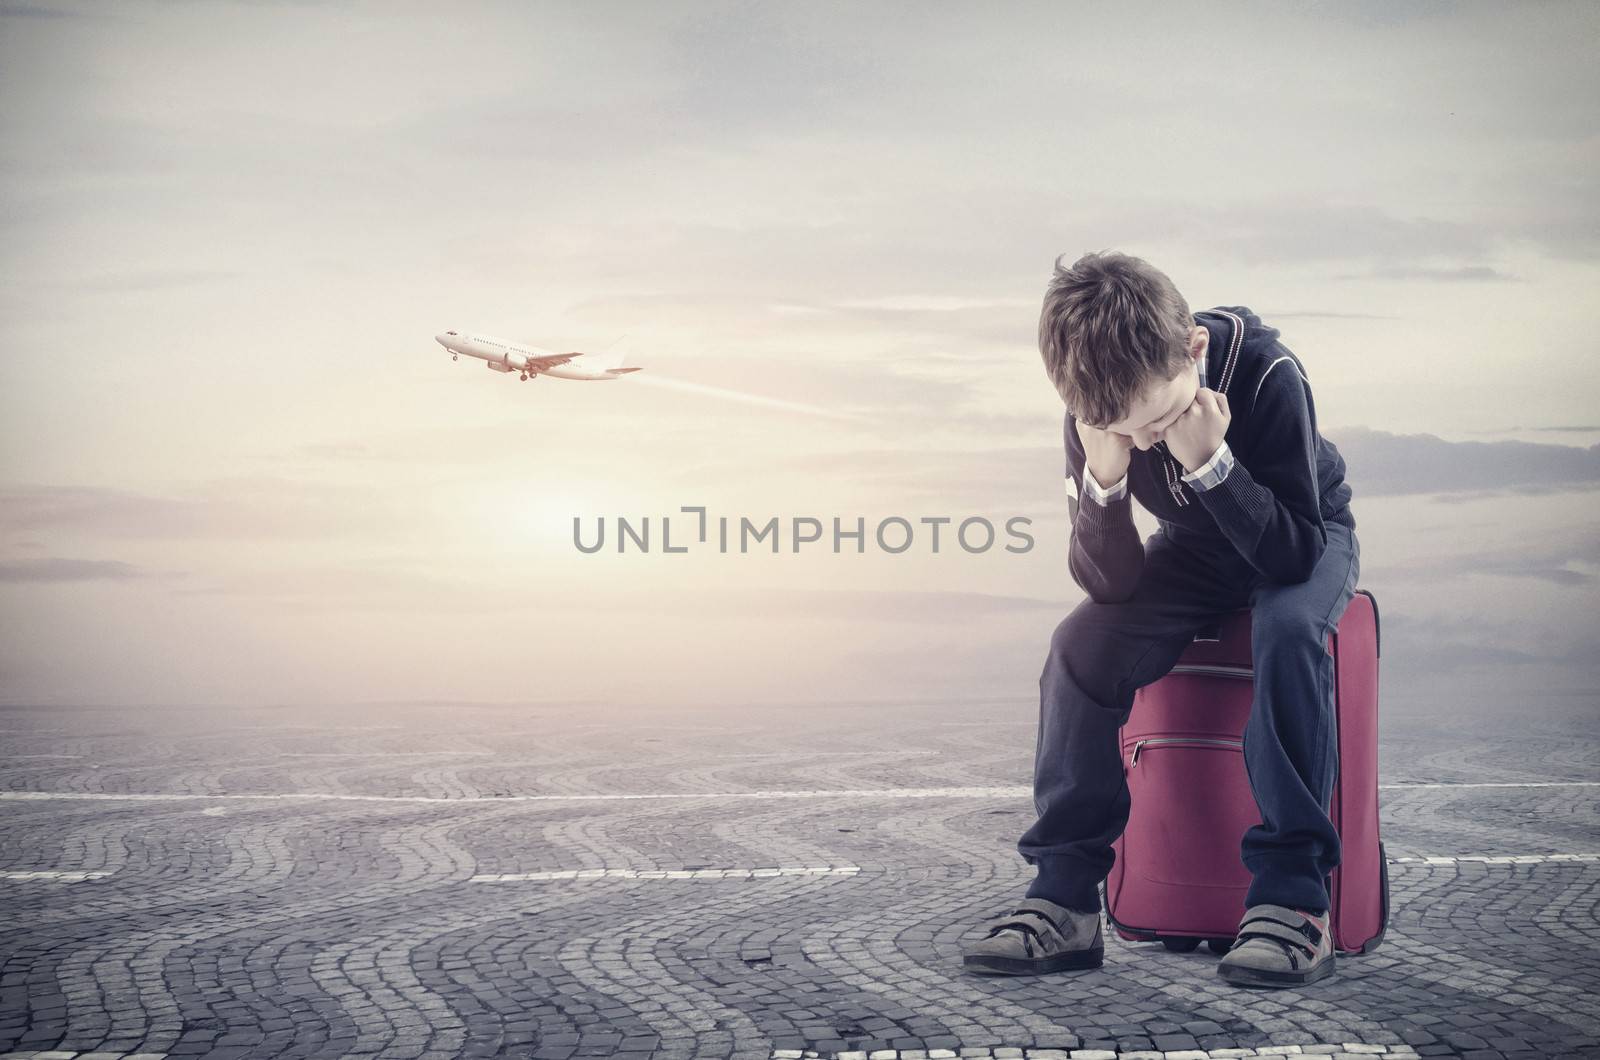 Upsaid boy sitting on baggagebecause he losing the plane